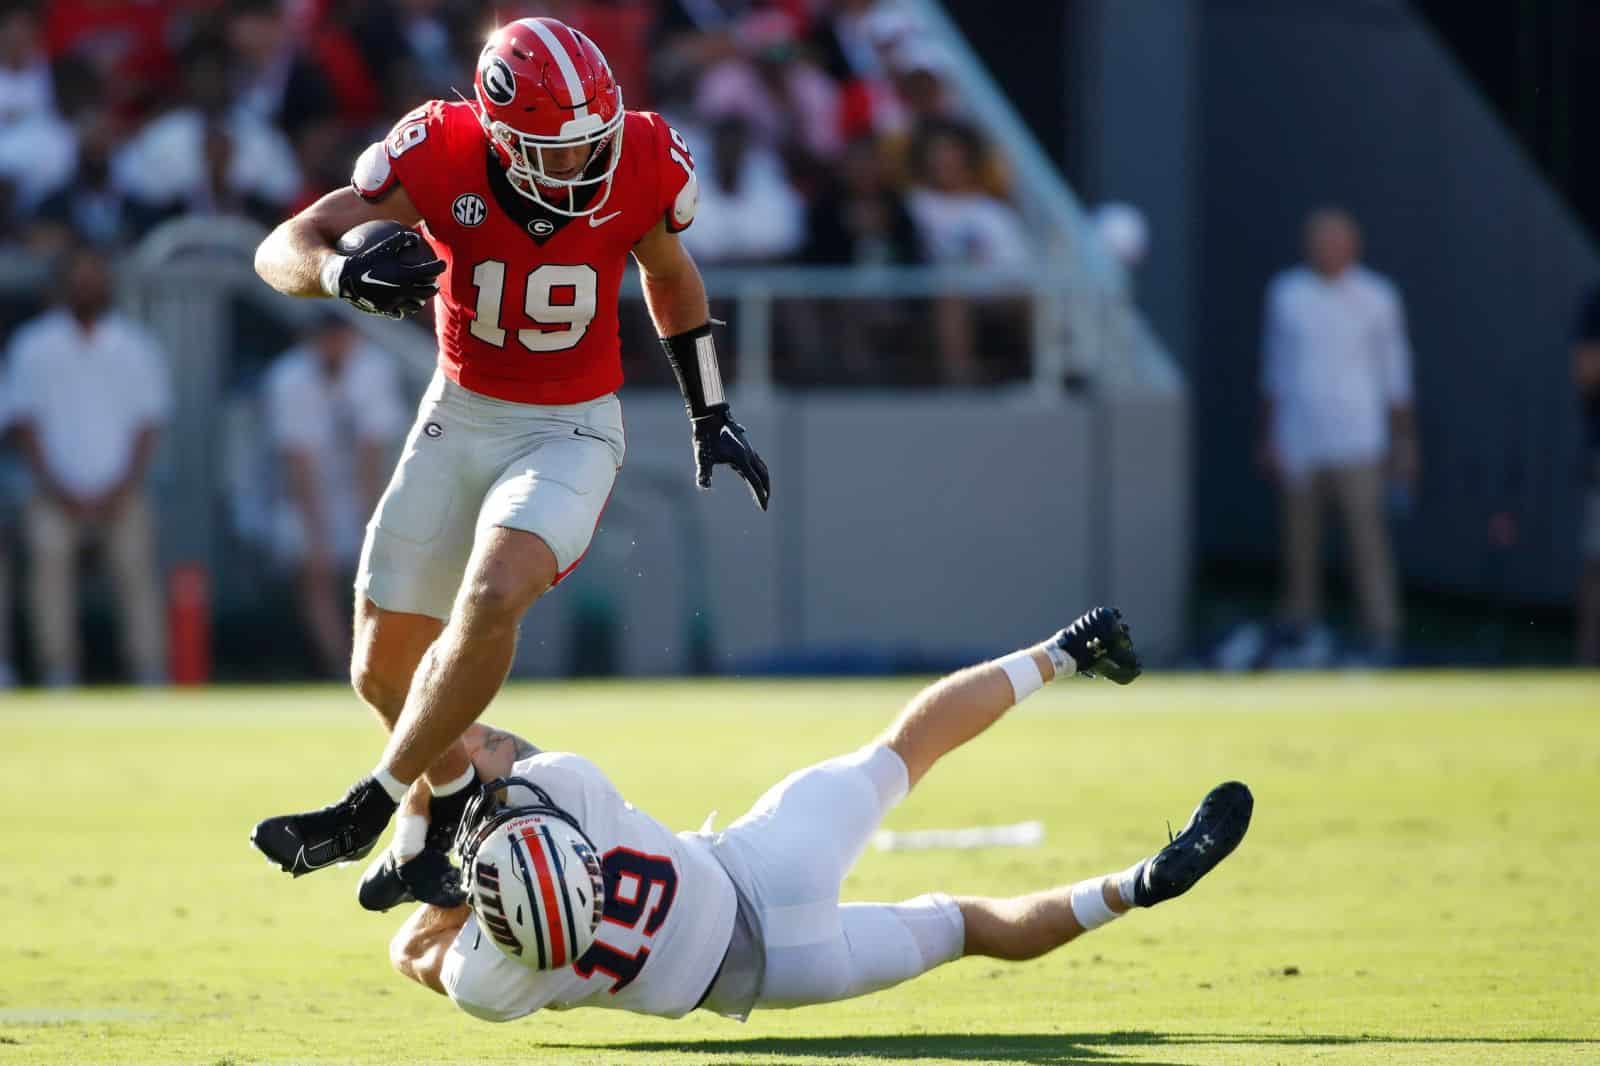 Georgia tight end Brock Bowers (19) avoids a tackle from Tennessee Martin safety Jack Lucas (19) during the first half of a NCAA college football game against Tennessee Martin in Athens, Ga., on Saturday, Sept. 2, 2023.